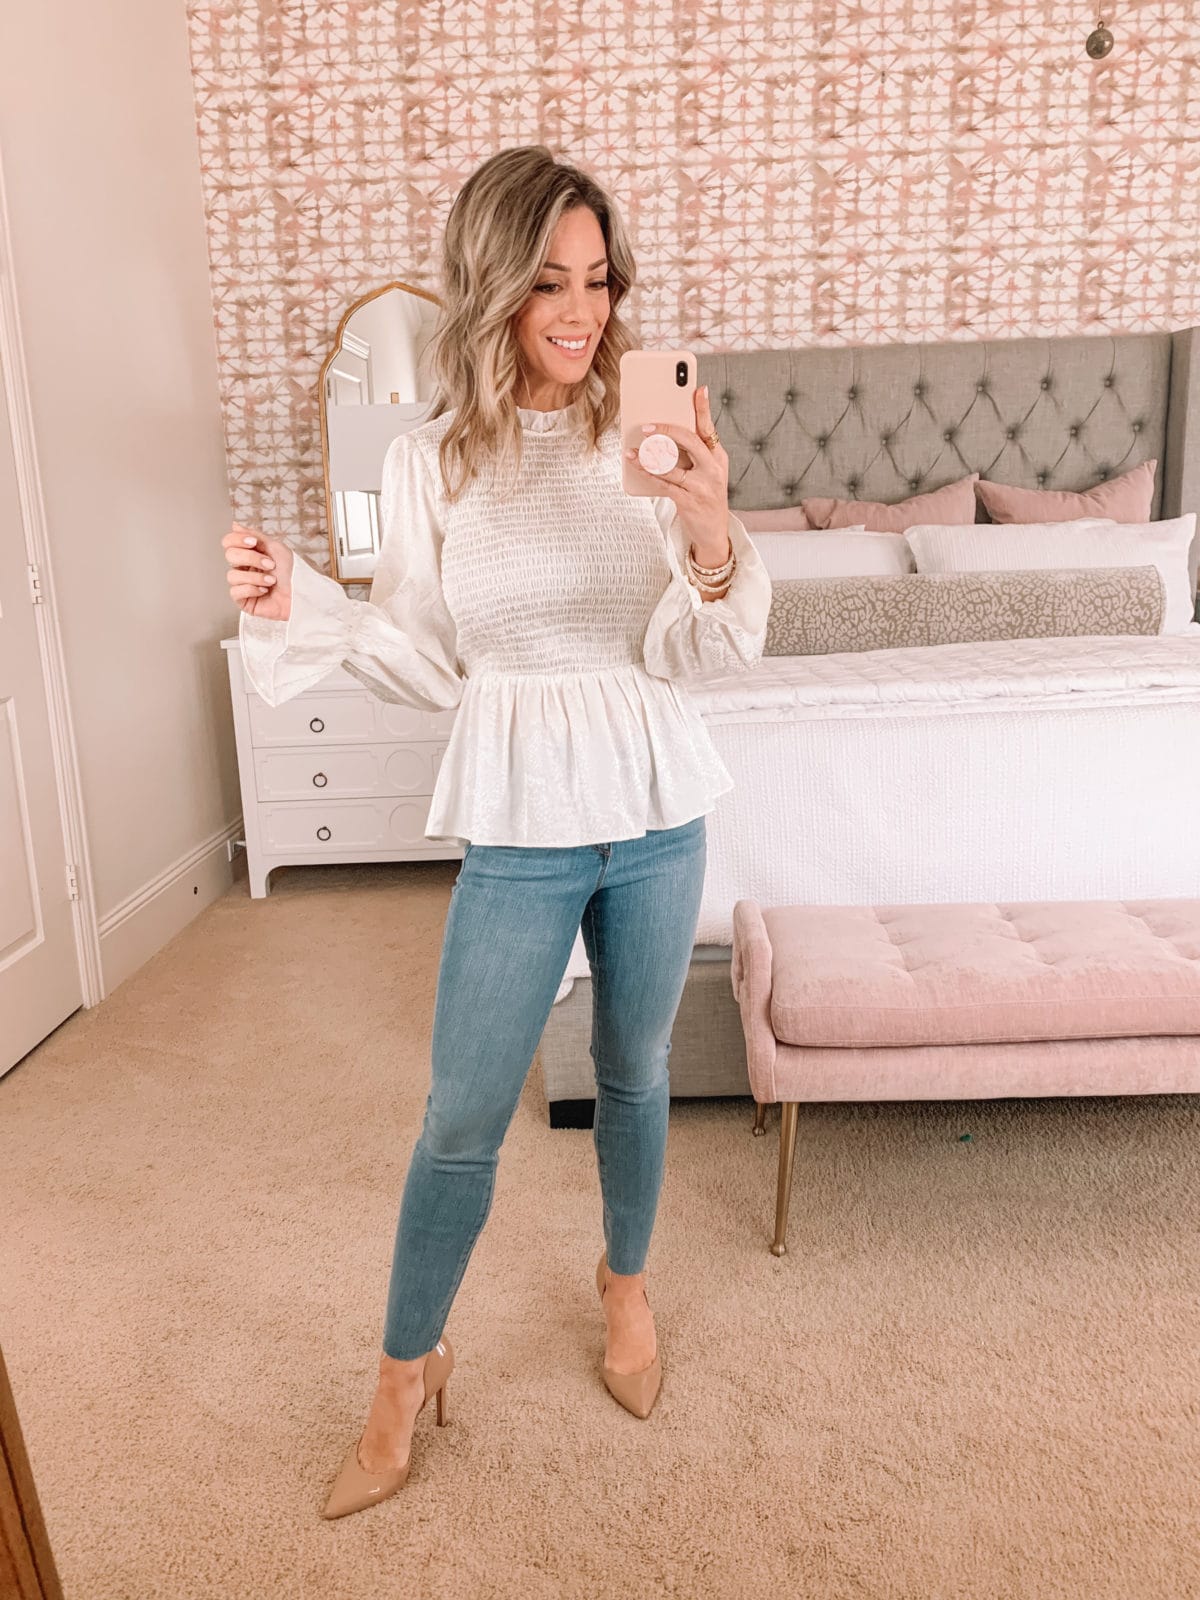 Dressing Room Finds, White Peplum Top, Jeans, Heels 